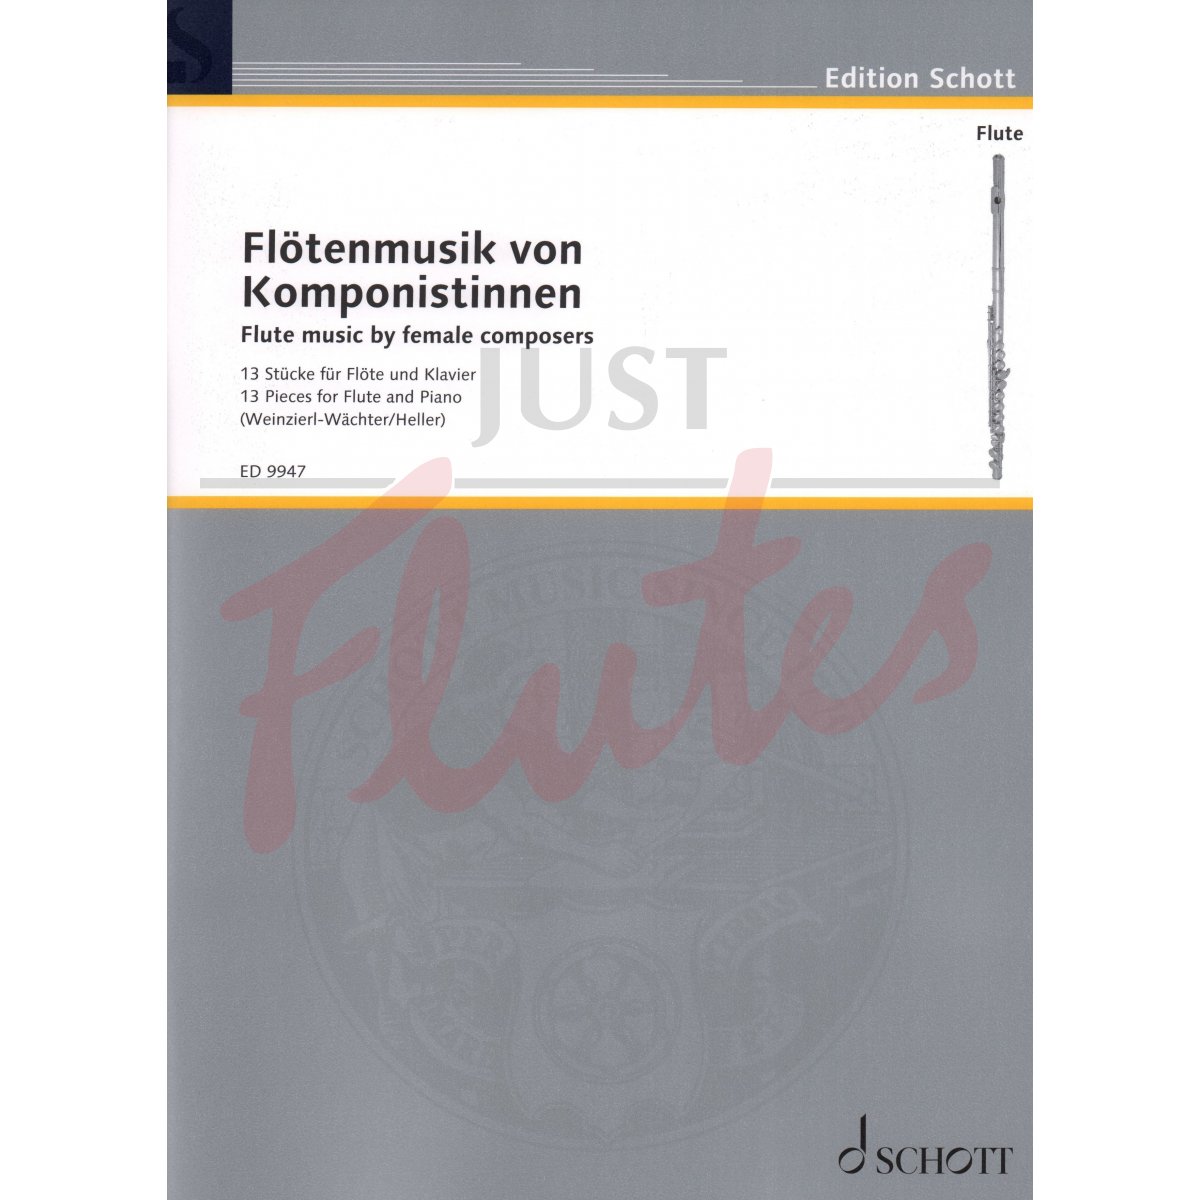 Flute Music by Female Composers: 13 Pieces for Flute and Piano